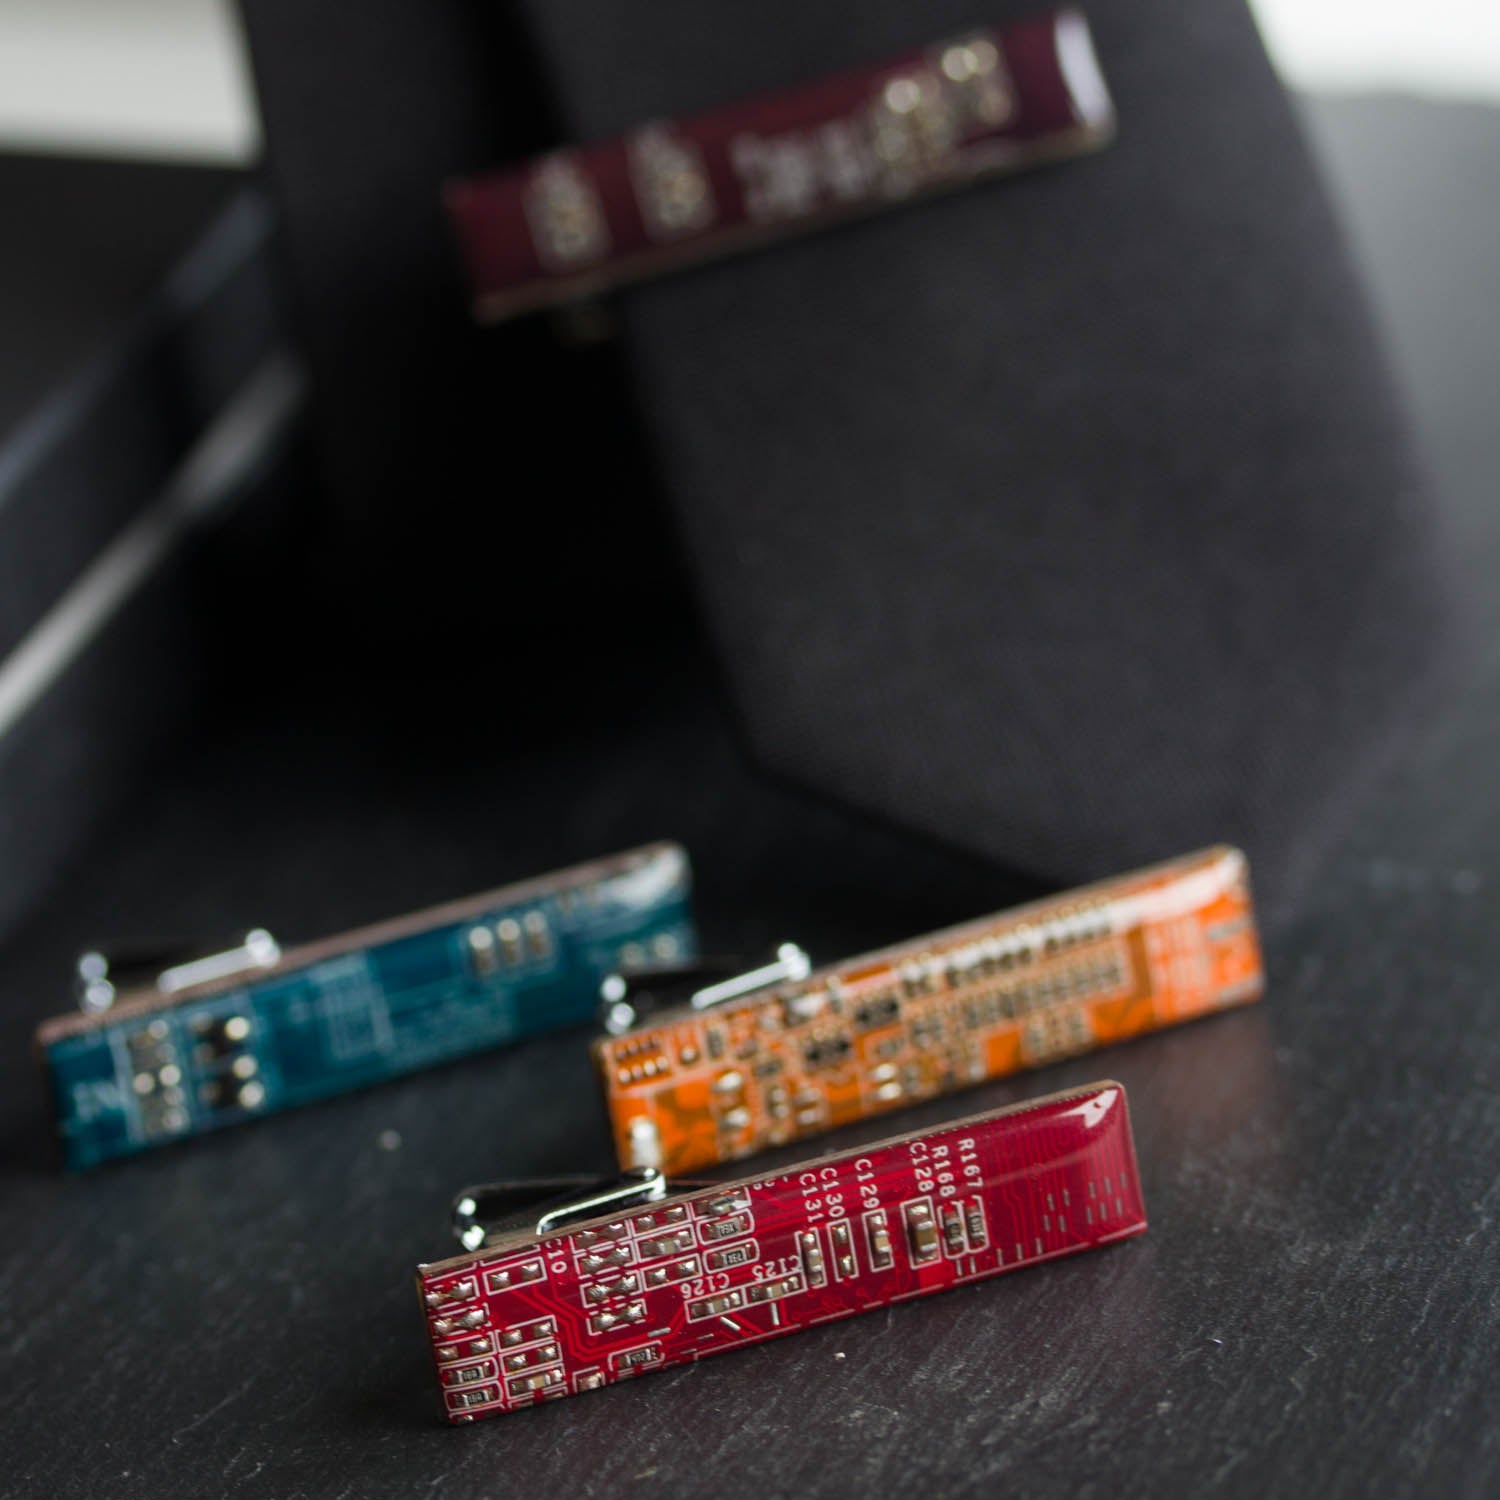 Short tie bar for a slim tie, made of circuit board